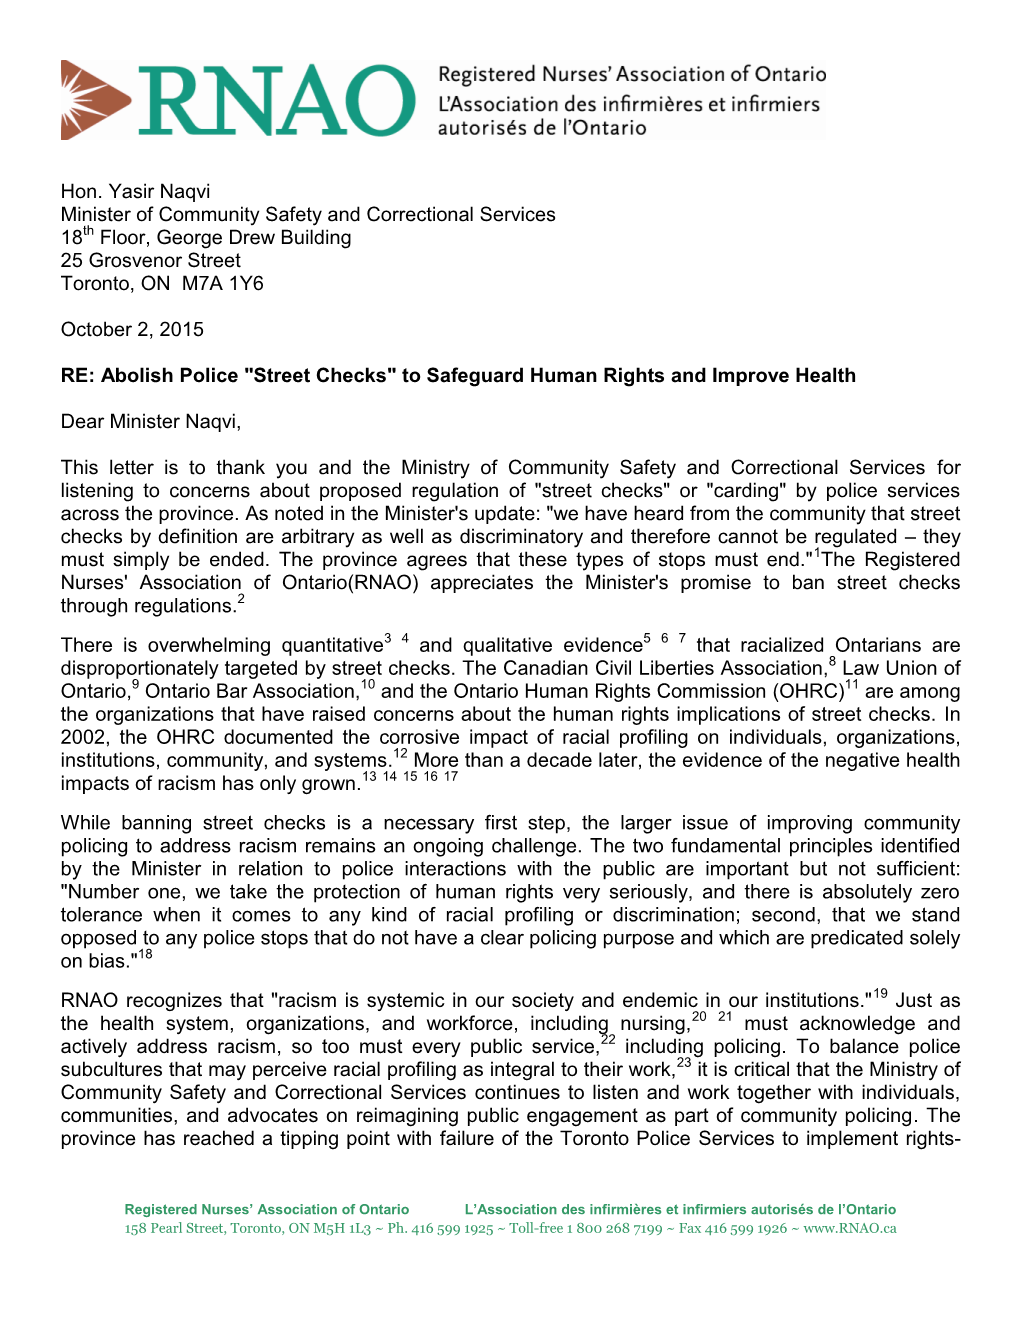 Letter to Yasir Naqvi